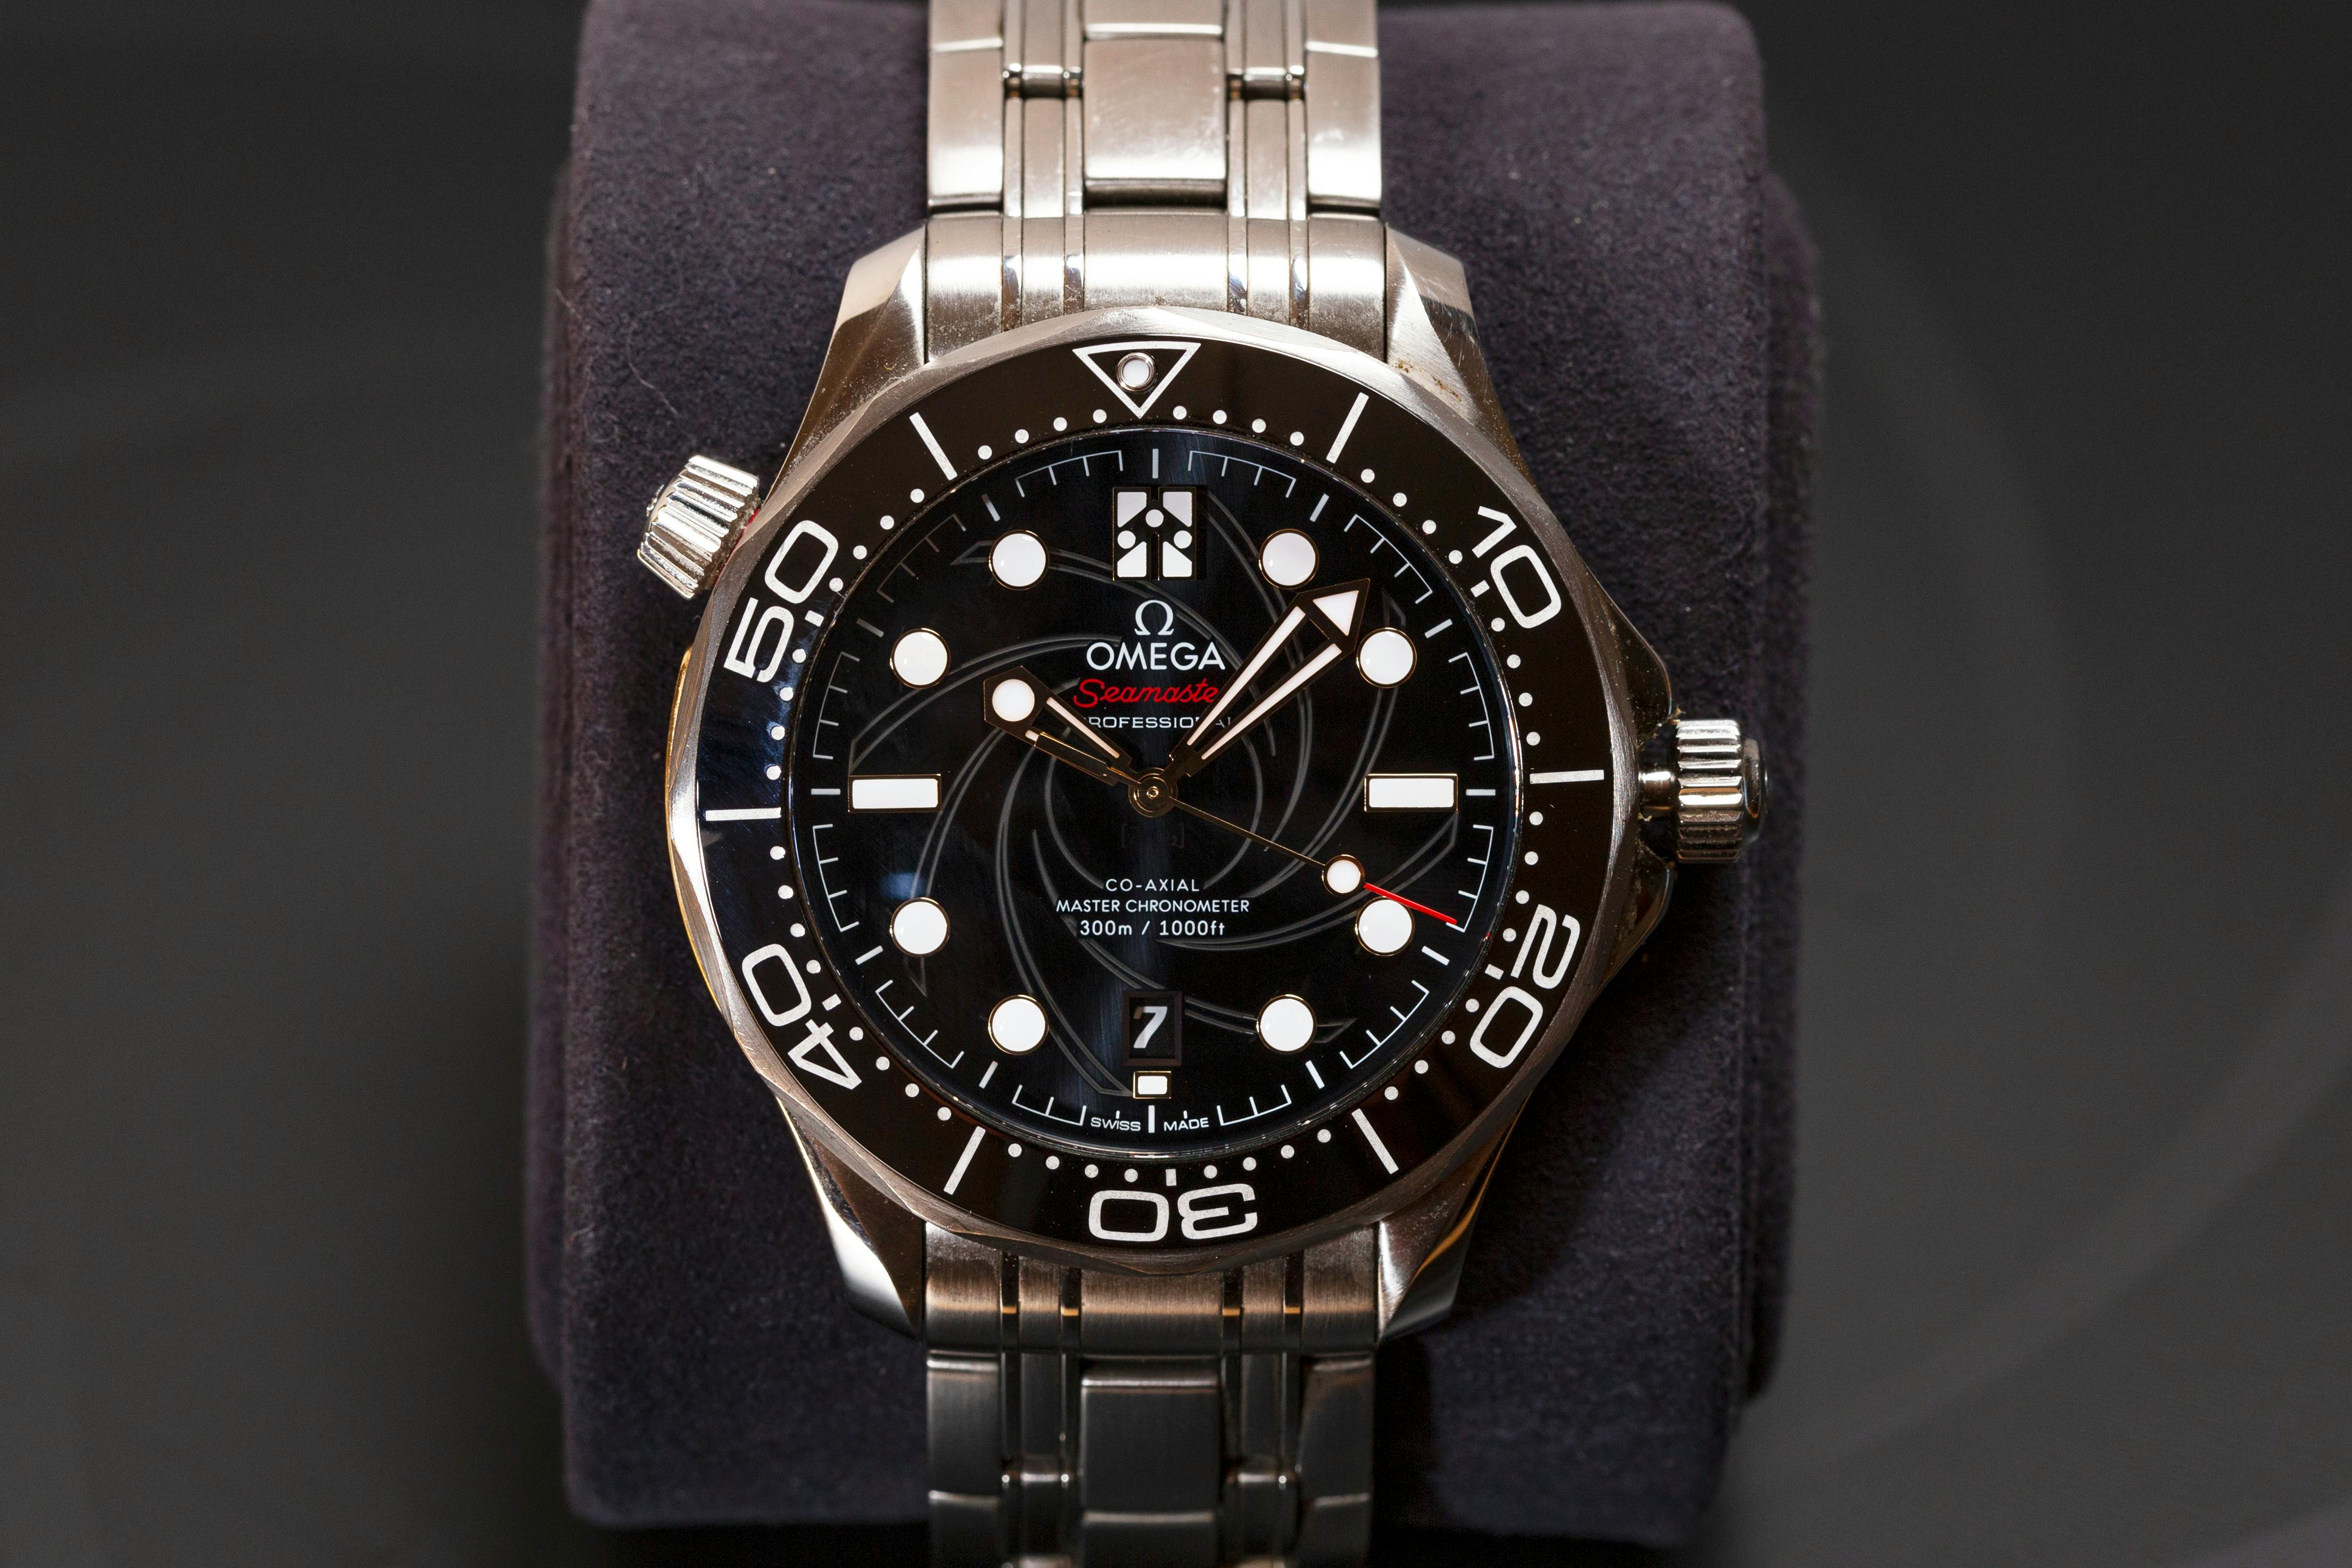 2019 OMEGA SEAMASTER 300M JAMES BOND LIMITED EDITION for sale by auction in  Stamford, Lincolnshire, United Kingdom